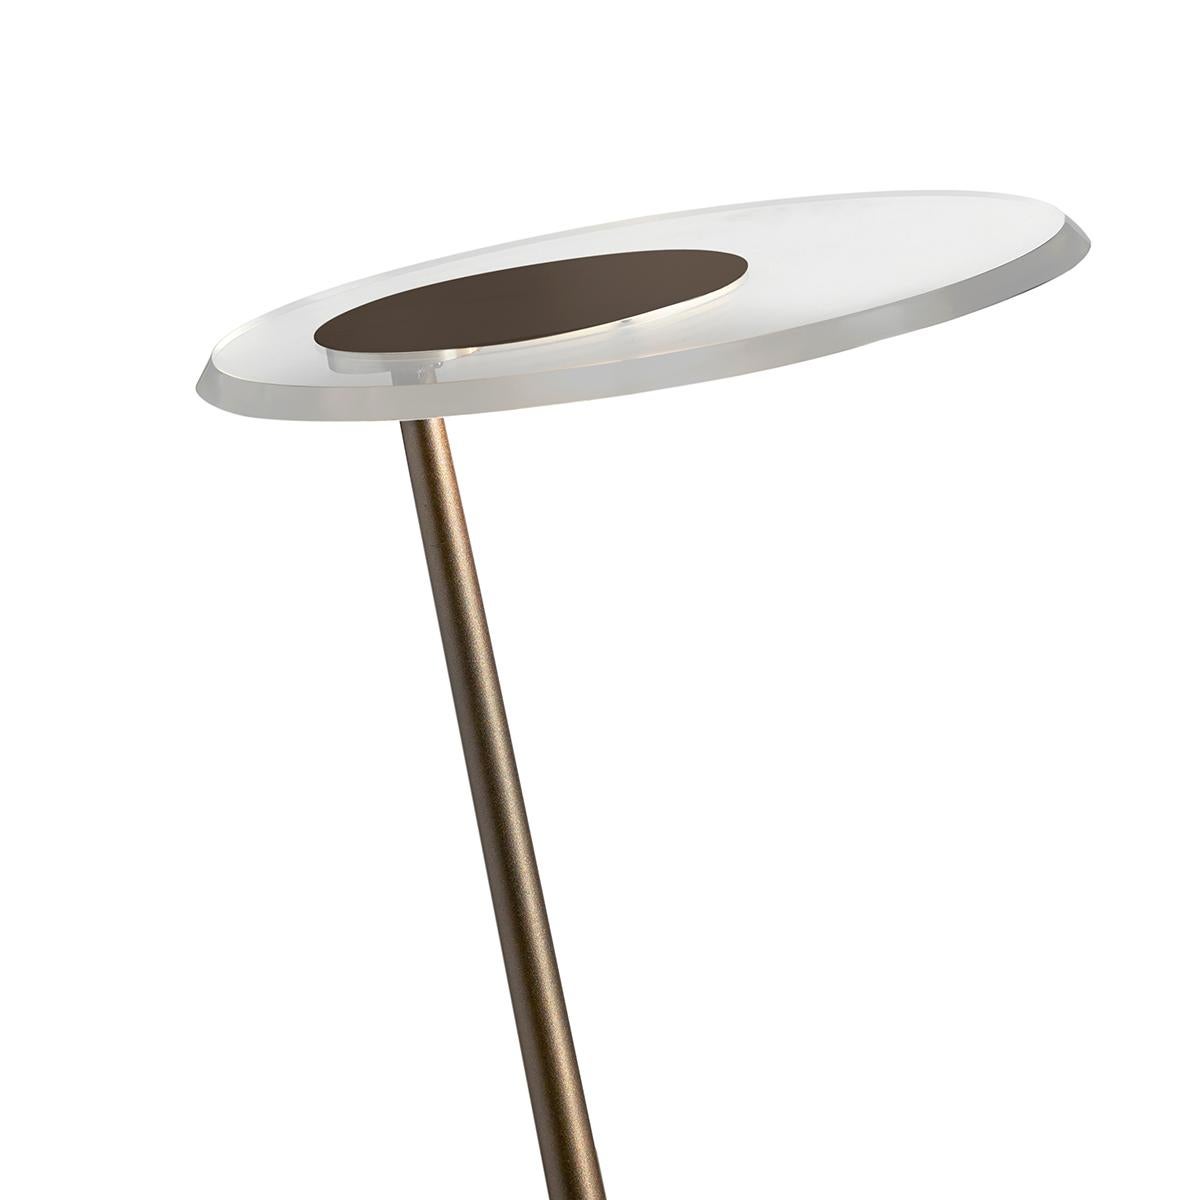 Outdoor lamp 'Amanita' designed by Mariana Pellegrino in 2019. Outdoor led lamp giving direct light in painted metal with sloped conical stem. Indian brown finish. PMMA transparent diffuser disk. Manufactured by Oluce, Italy.

Amanita is a reading